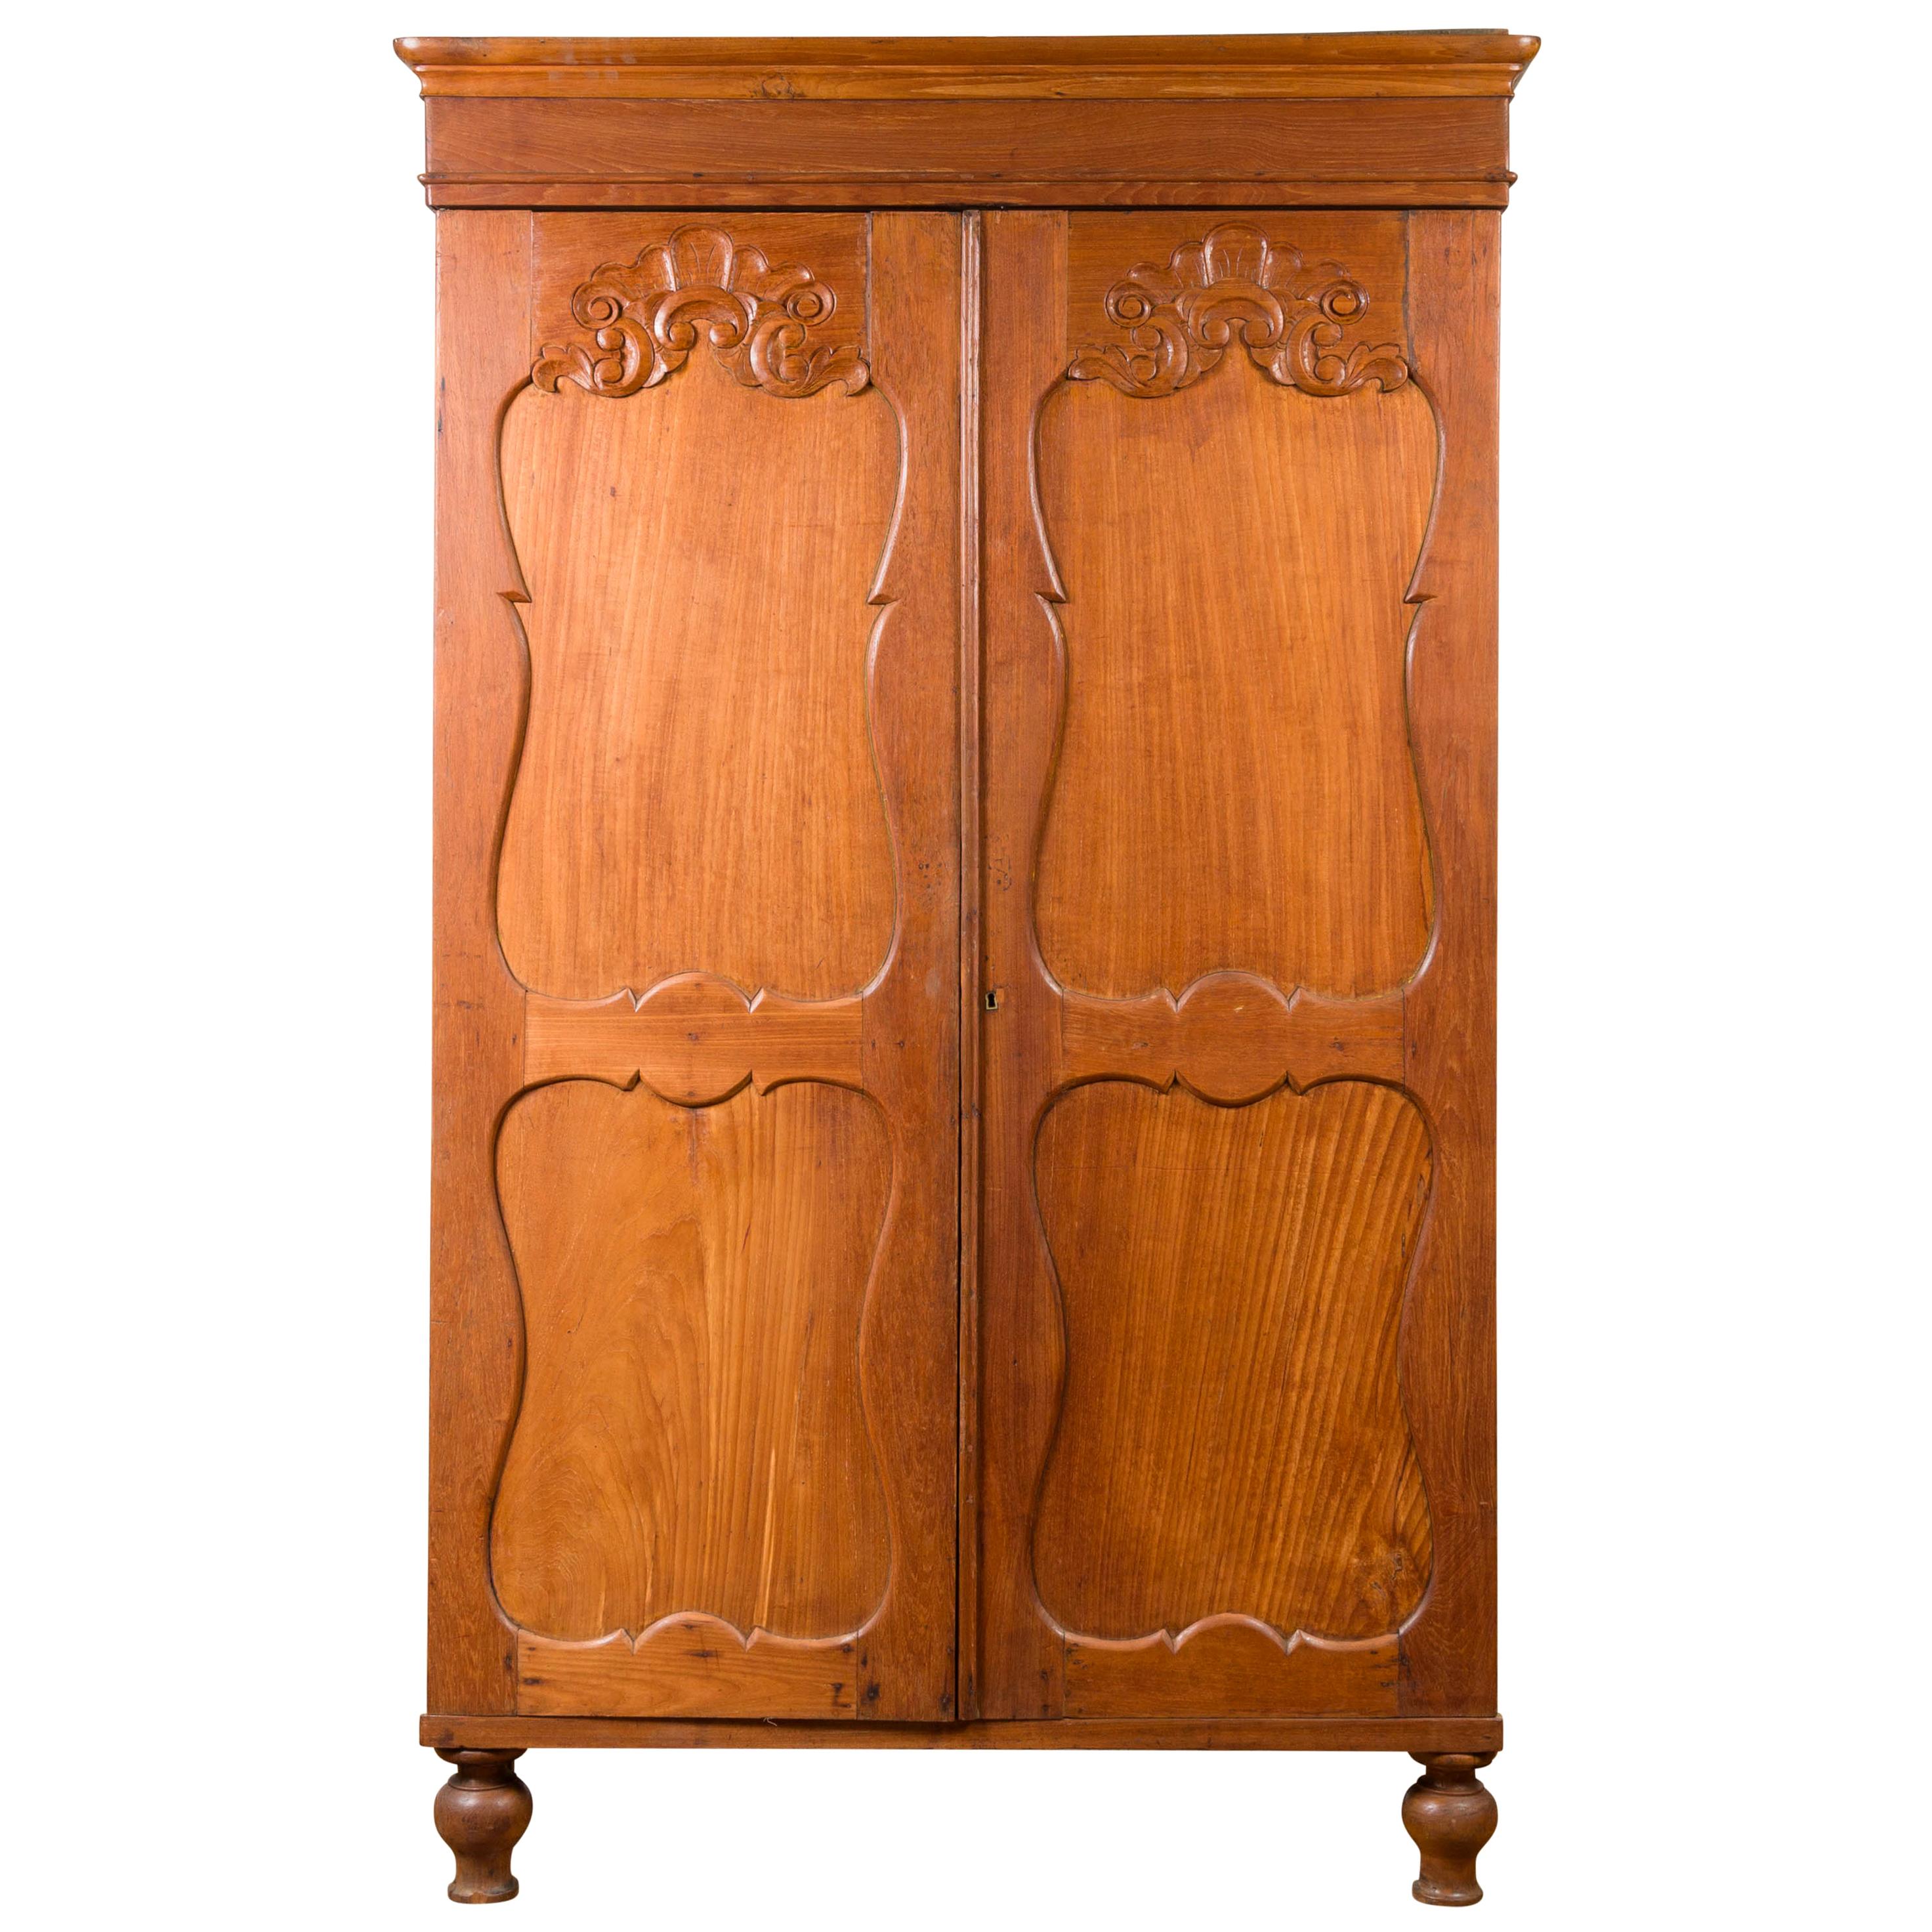 Dutch Colonial 19th Century Teak Wood Cabinet with Carved Panels and Shelves For Sale